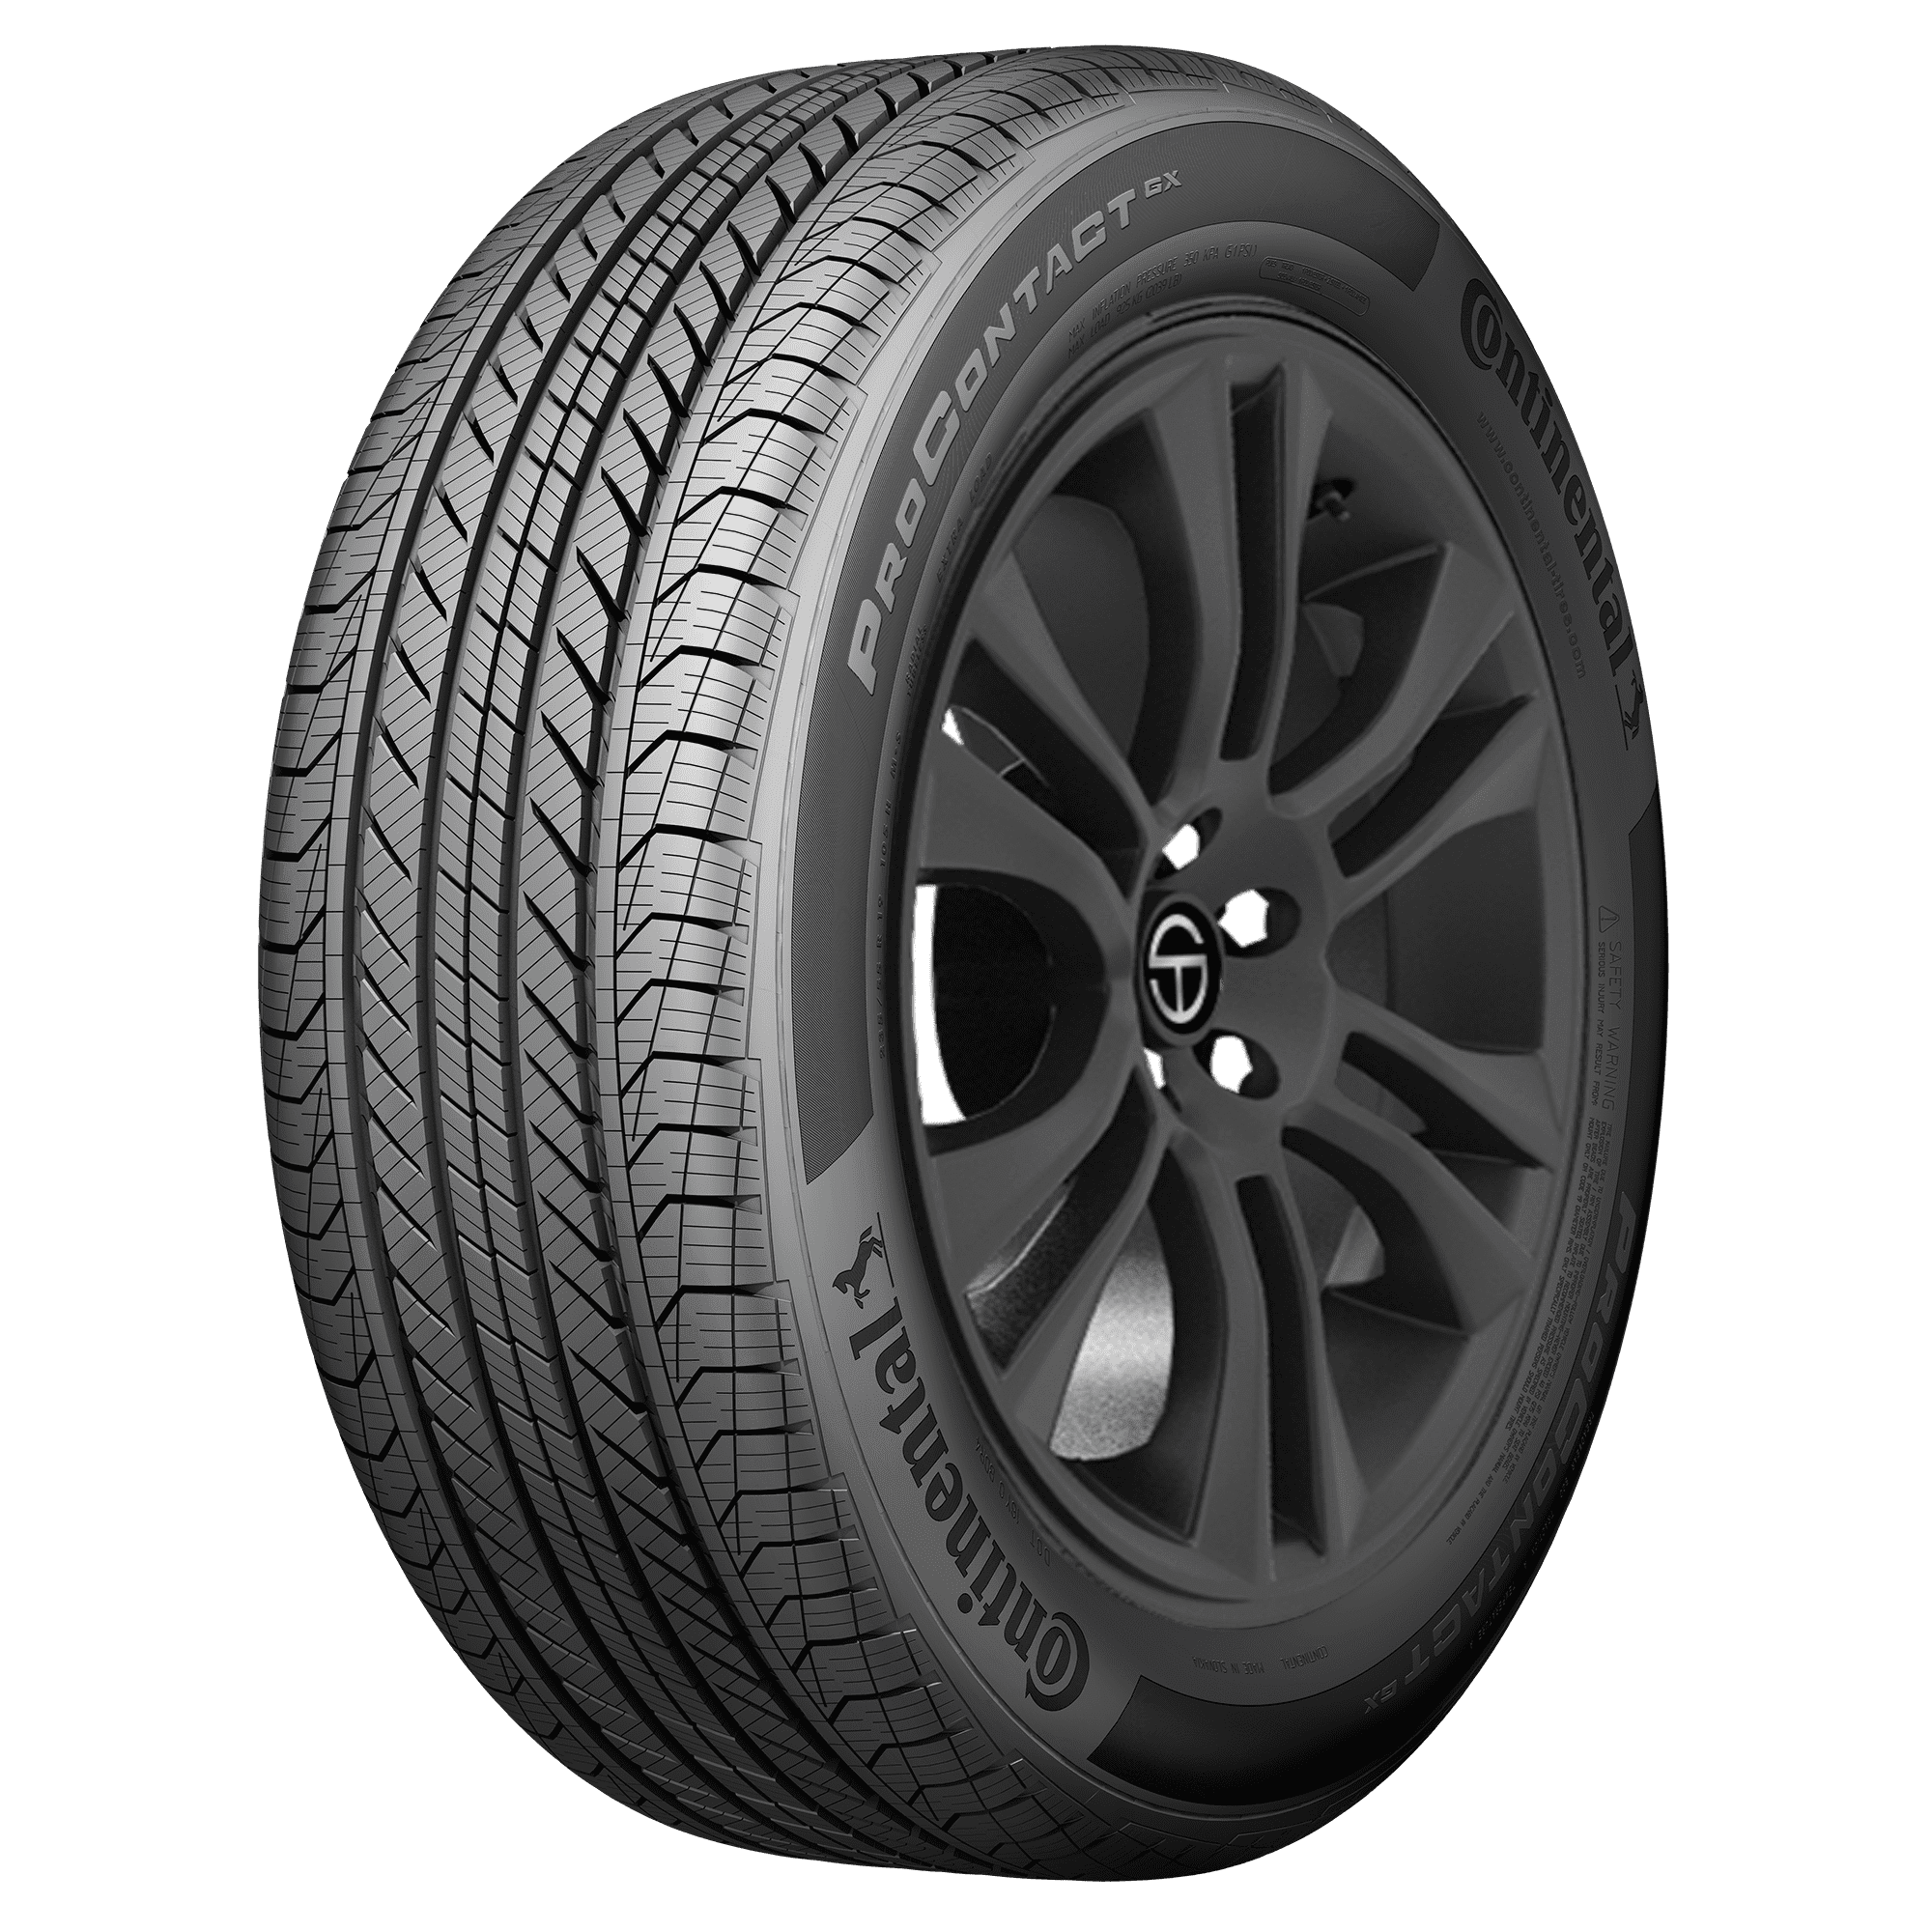 Shop for 245/40R19 Tires for Your Vehicle | SimpleTire